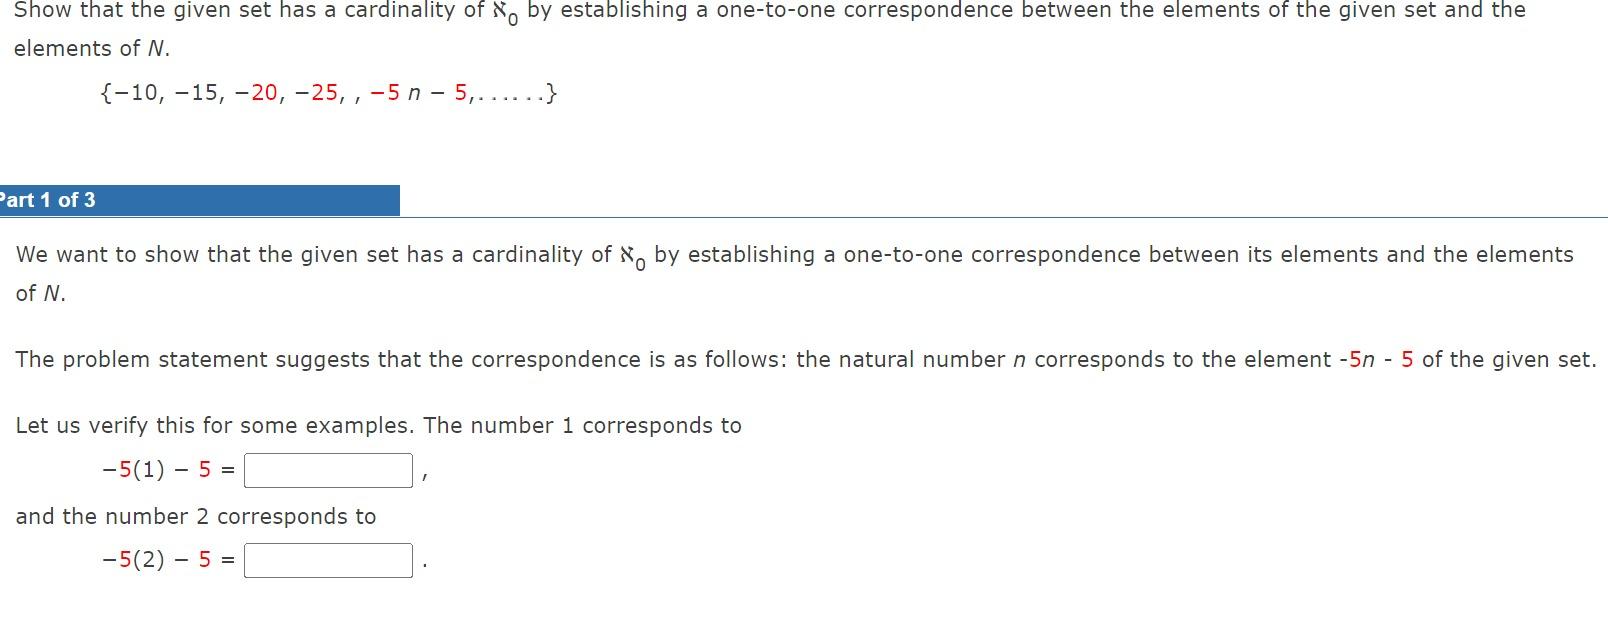 Show that the given set has a cardinality of \( \aleph_{0} \) by establishing a one-to-one correspondence between the element